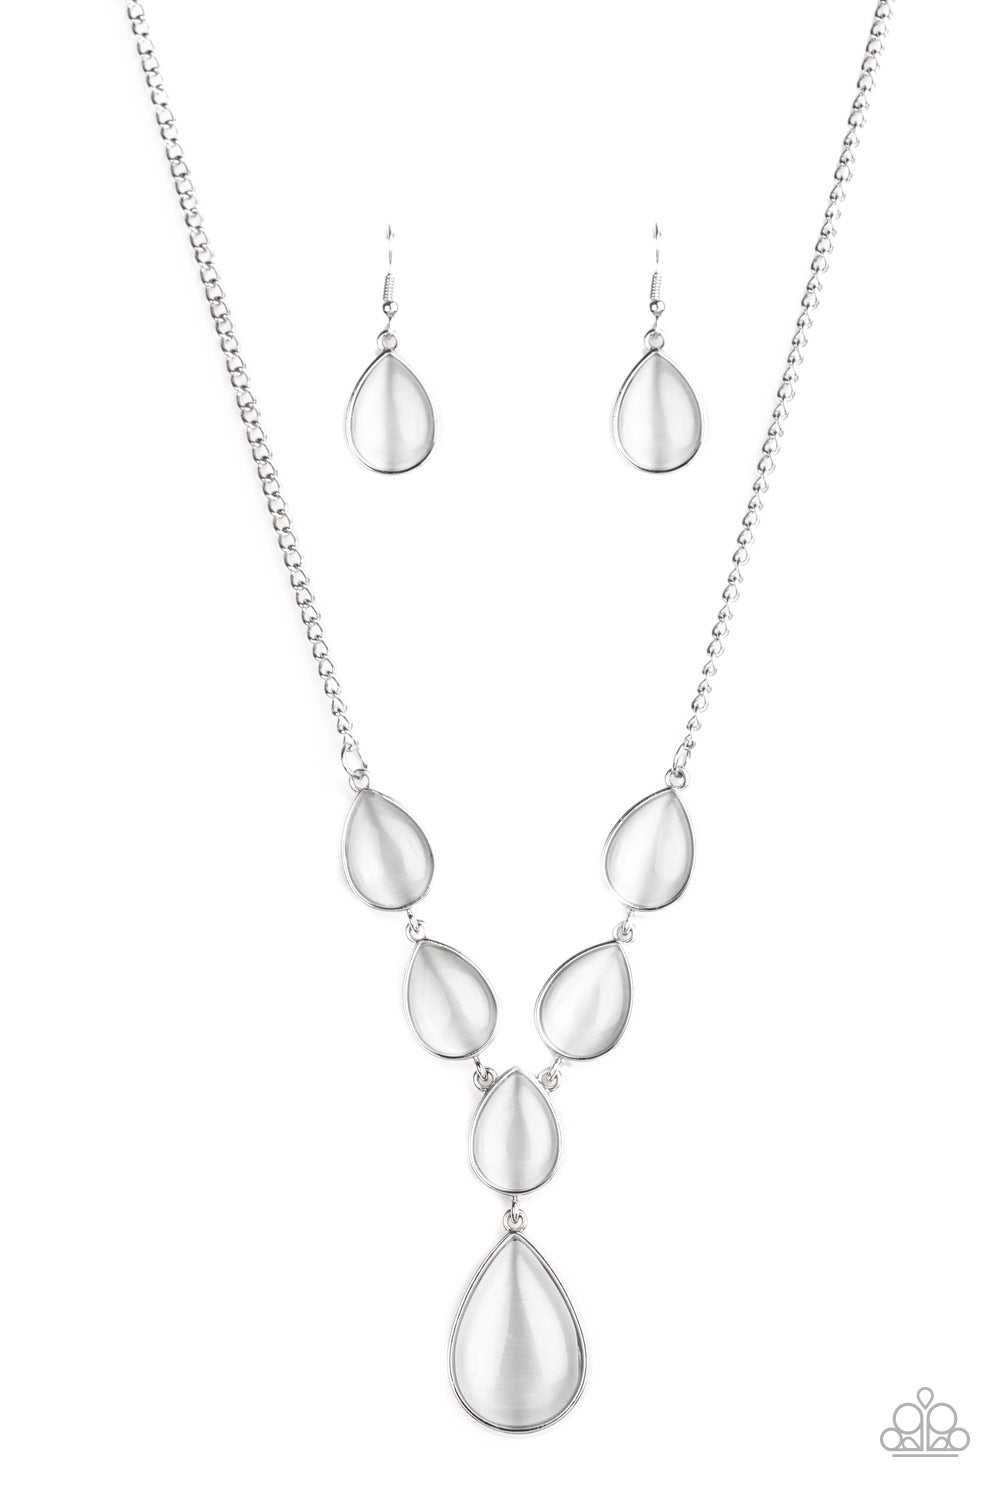 Dewy Decadence - White Necklace